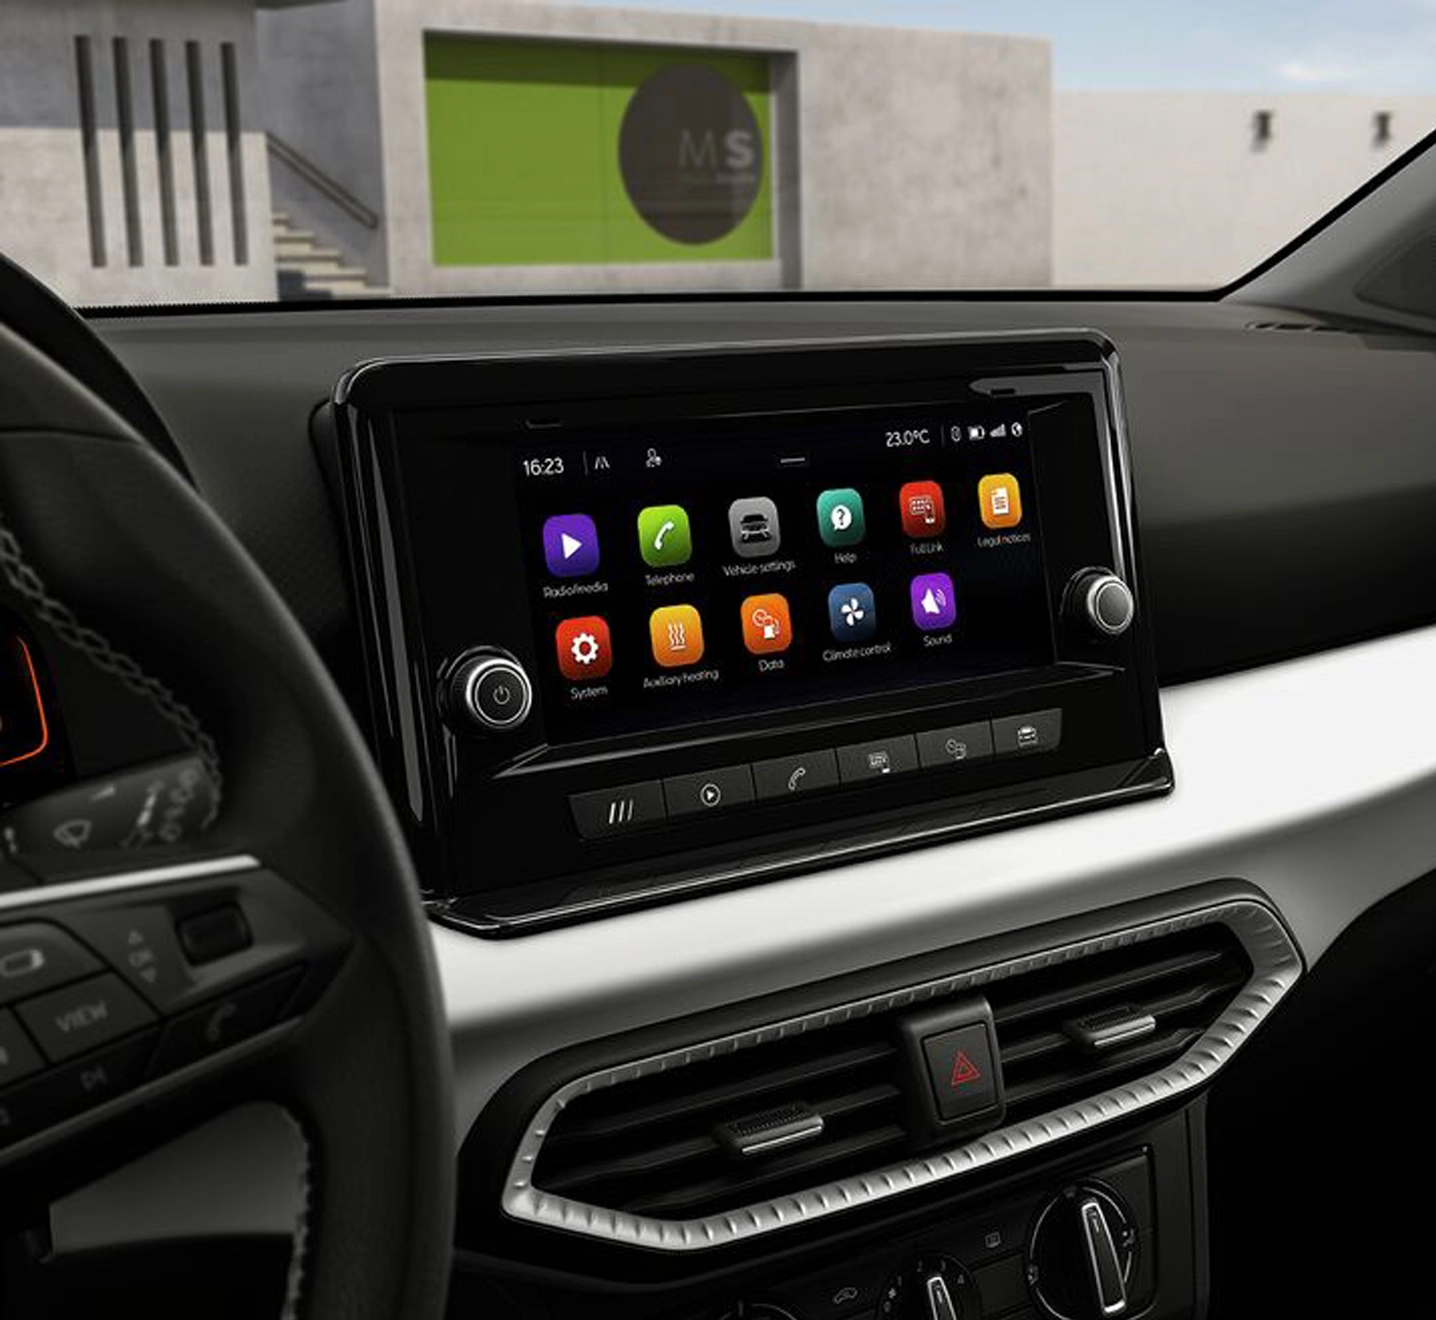 SEAT Arona full link screen console technology